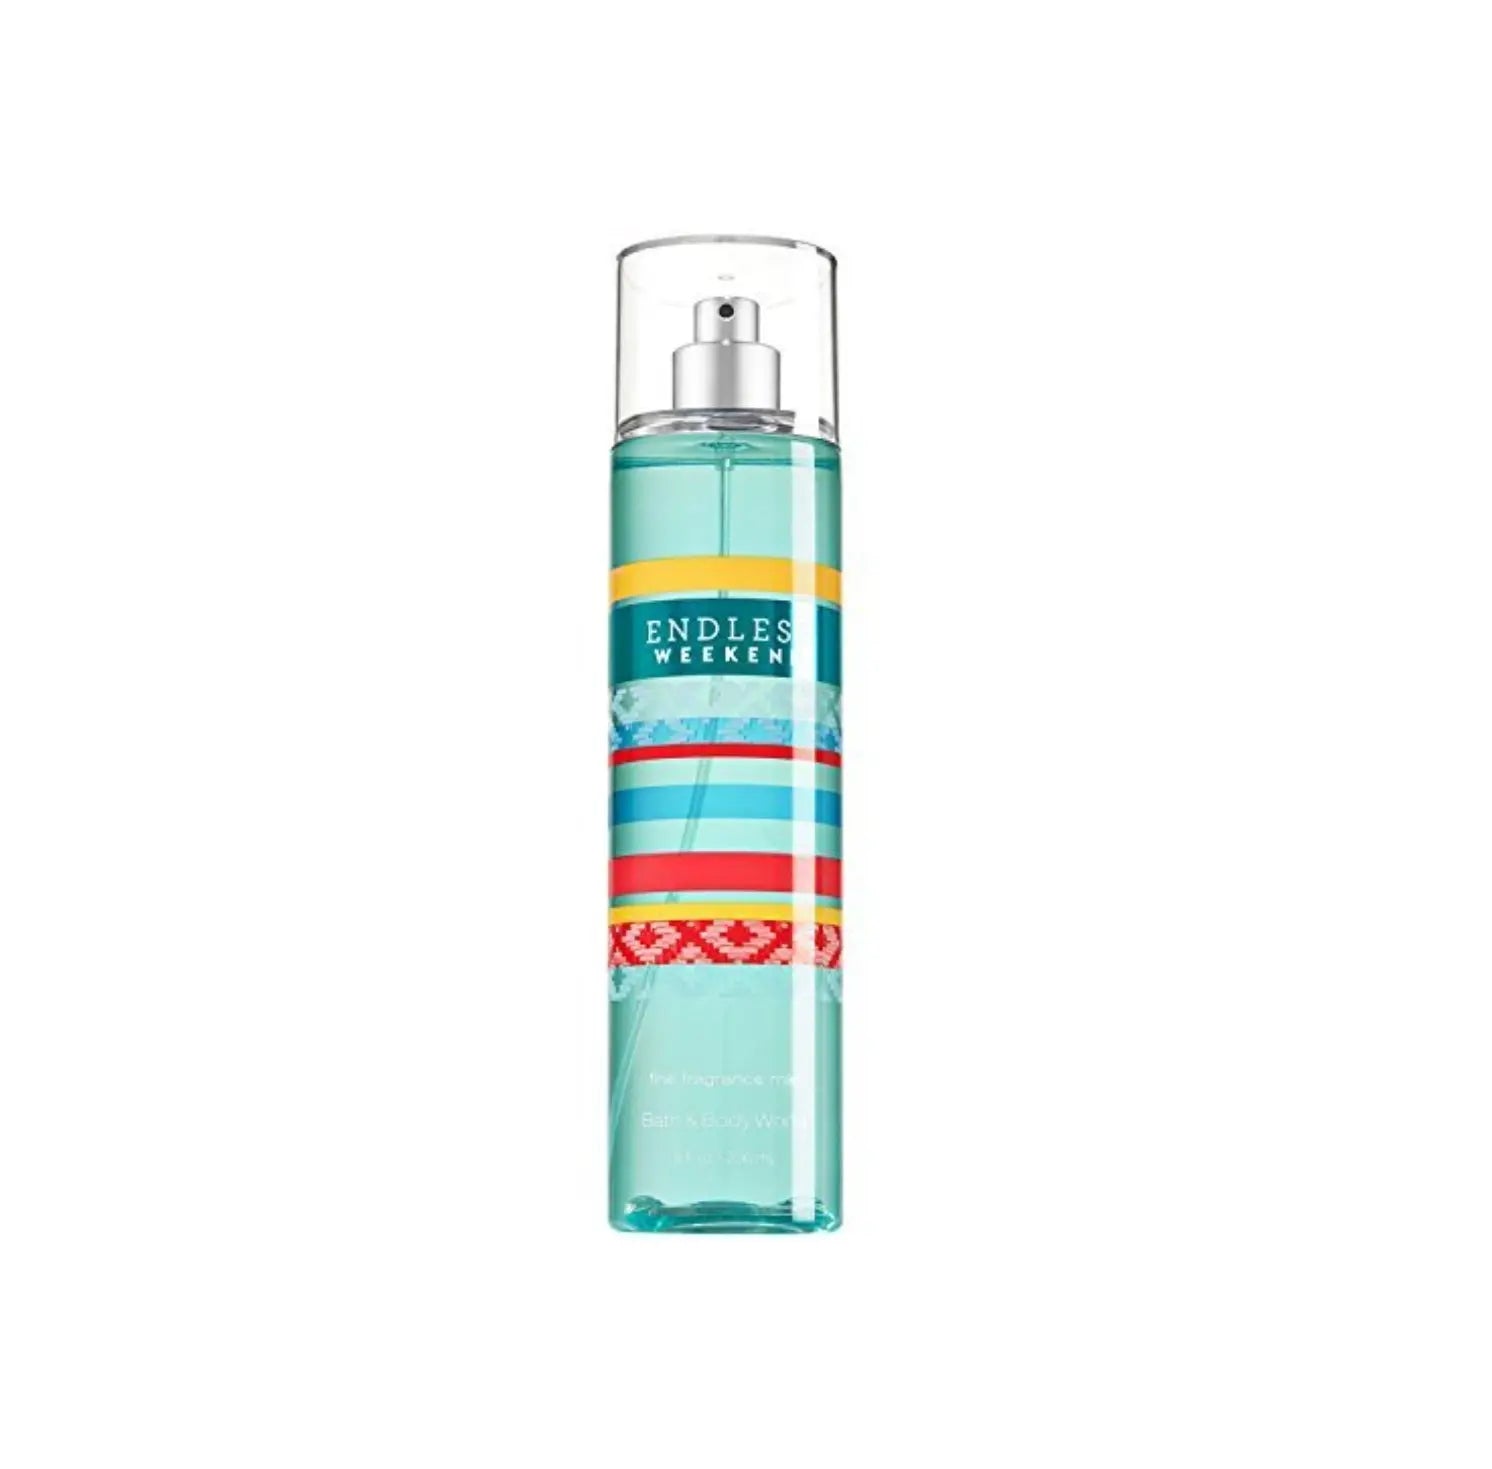 Bath & Body Works Fine Fragrance Mist Endless Weekend 8oz Imported Perfumes & Beauty Store